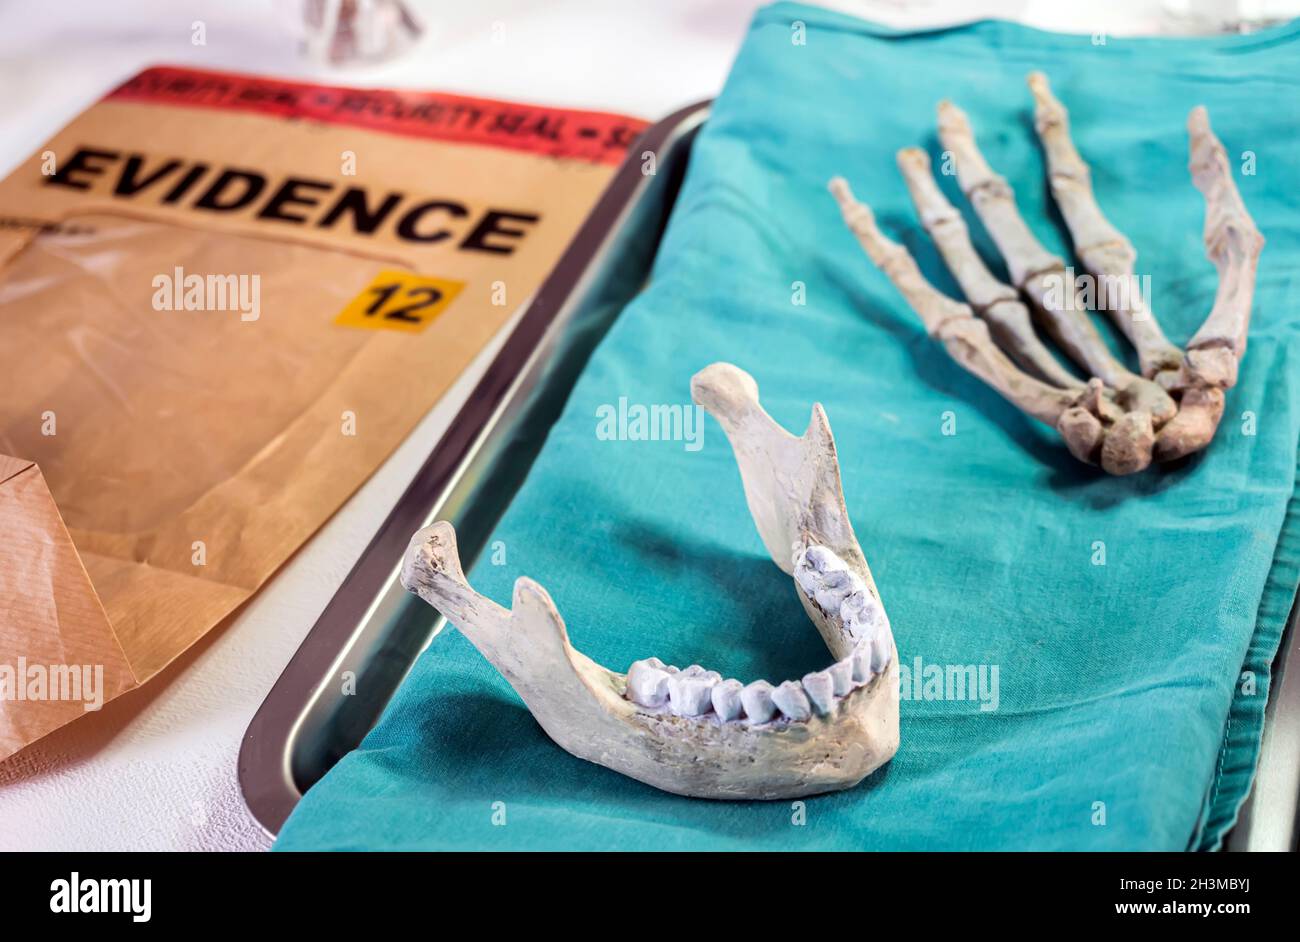 Human lower jaw and right hand in forensic laboratory murder investigation, concept image Stock Photo